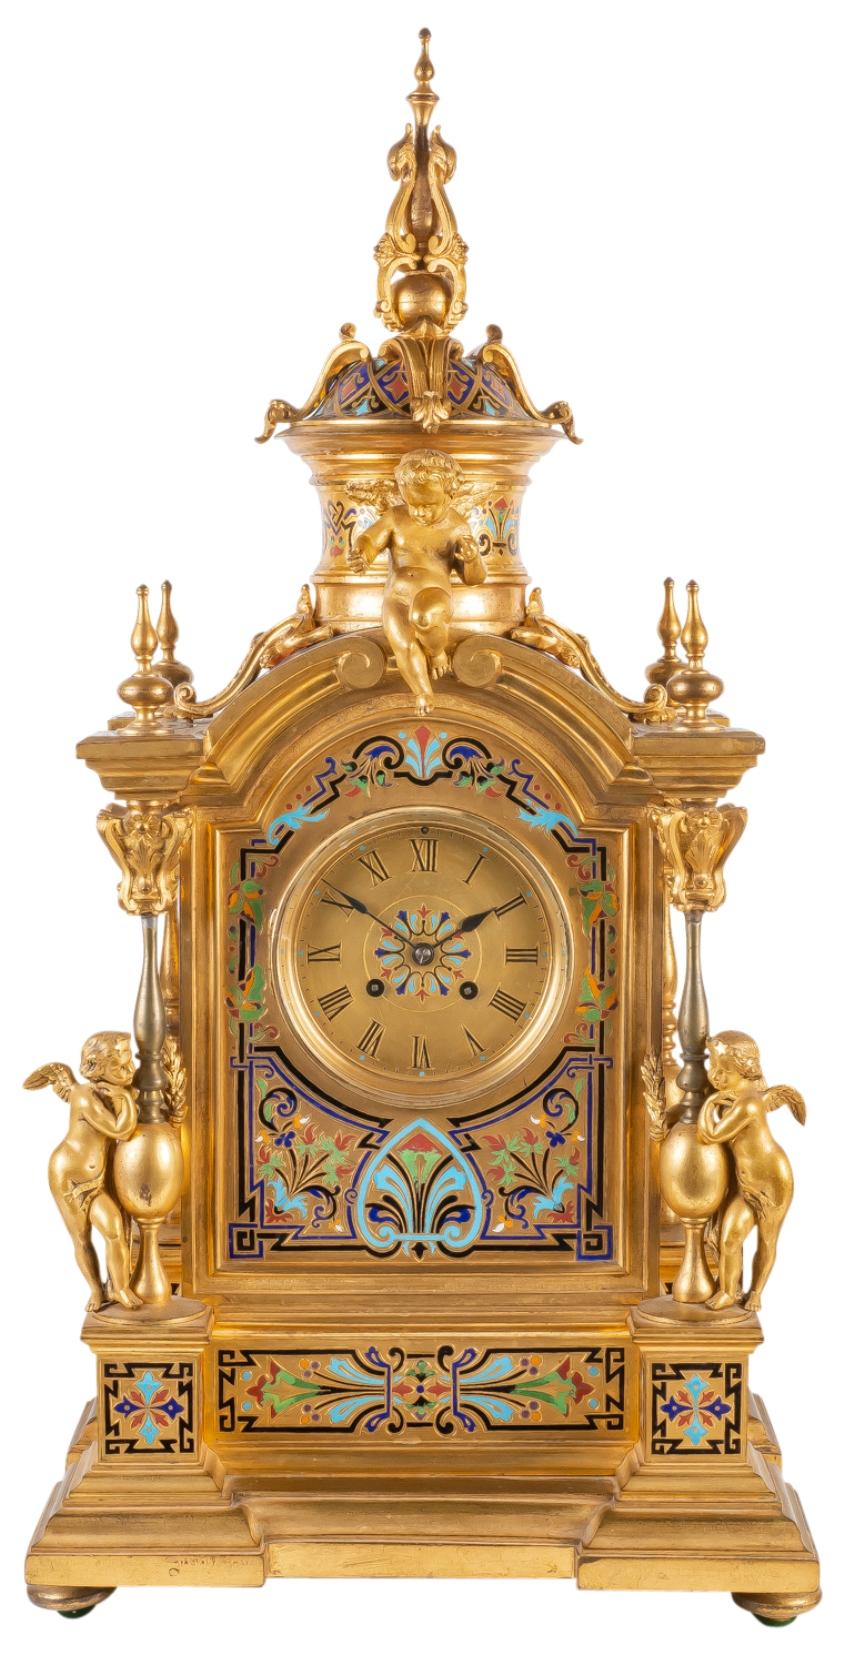 A fine quality large 19th century French gilded ormolu and Champlevé enamel clock garniture, having cherubs perched on top and to the sides, turned finials and columns. Bright coloured classical motif enamel decoration, flanked by a pair of matching